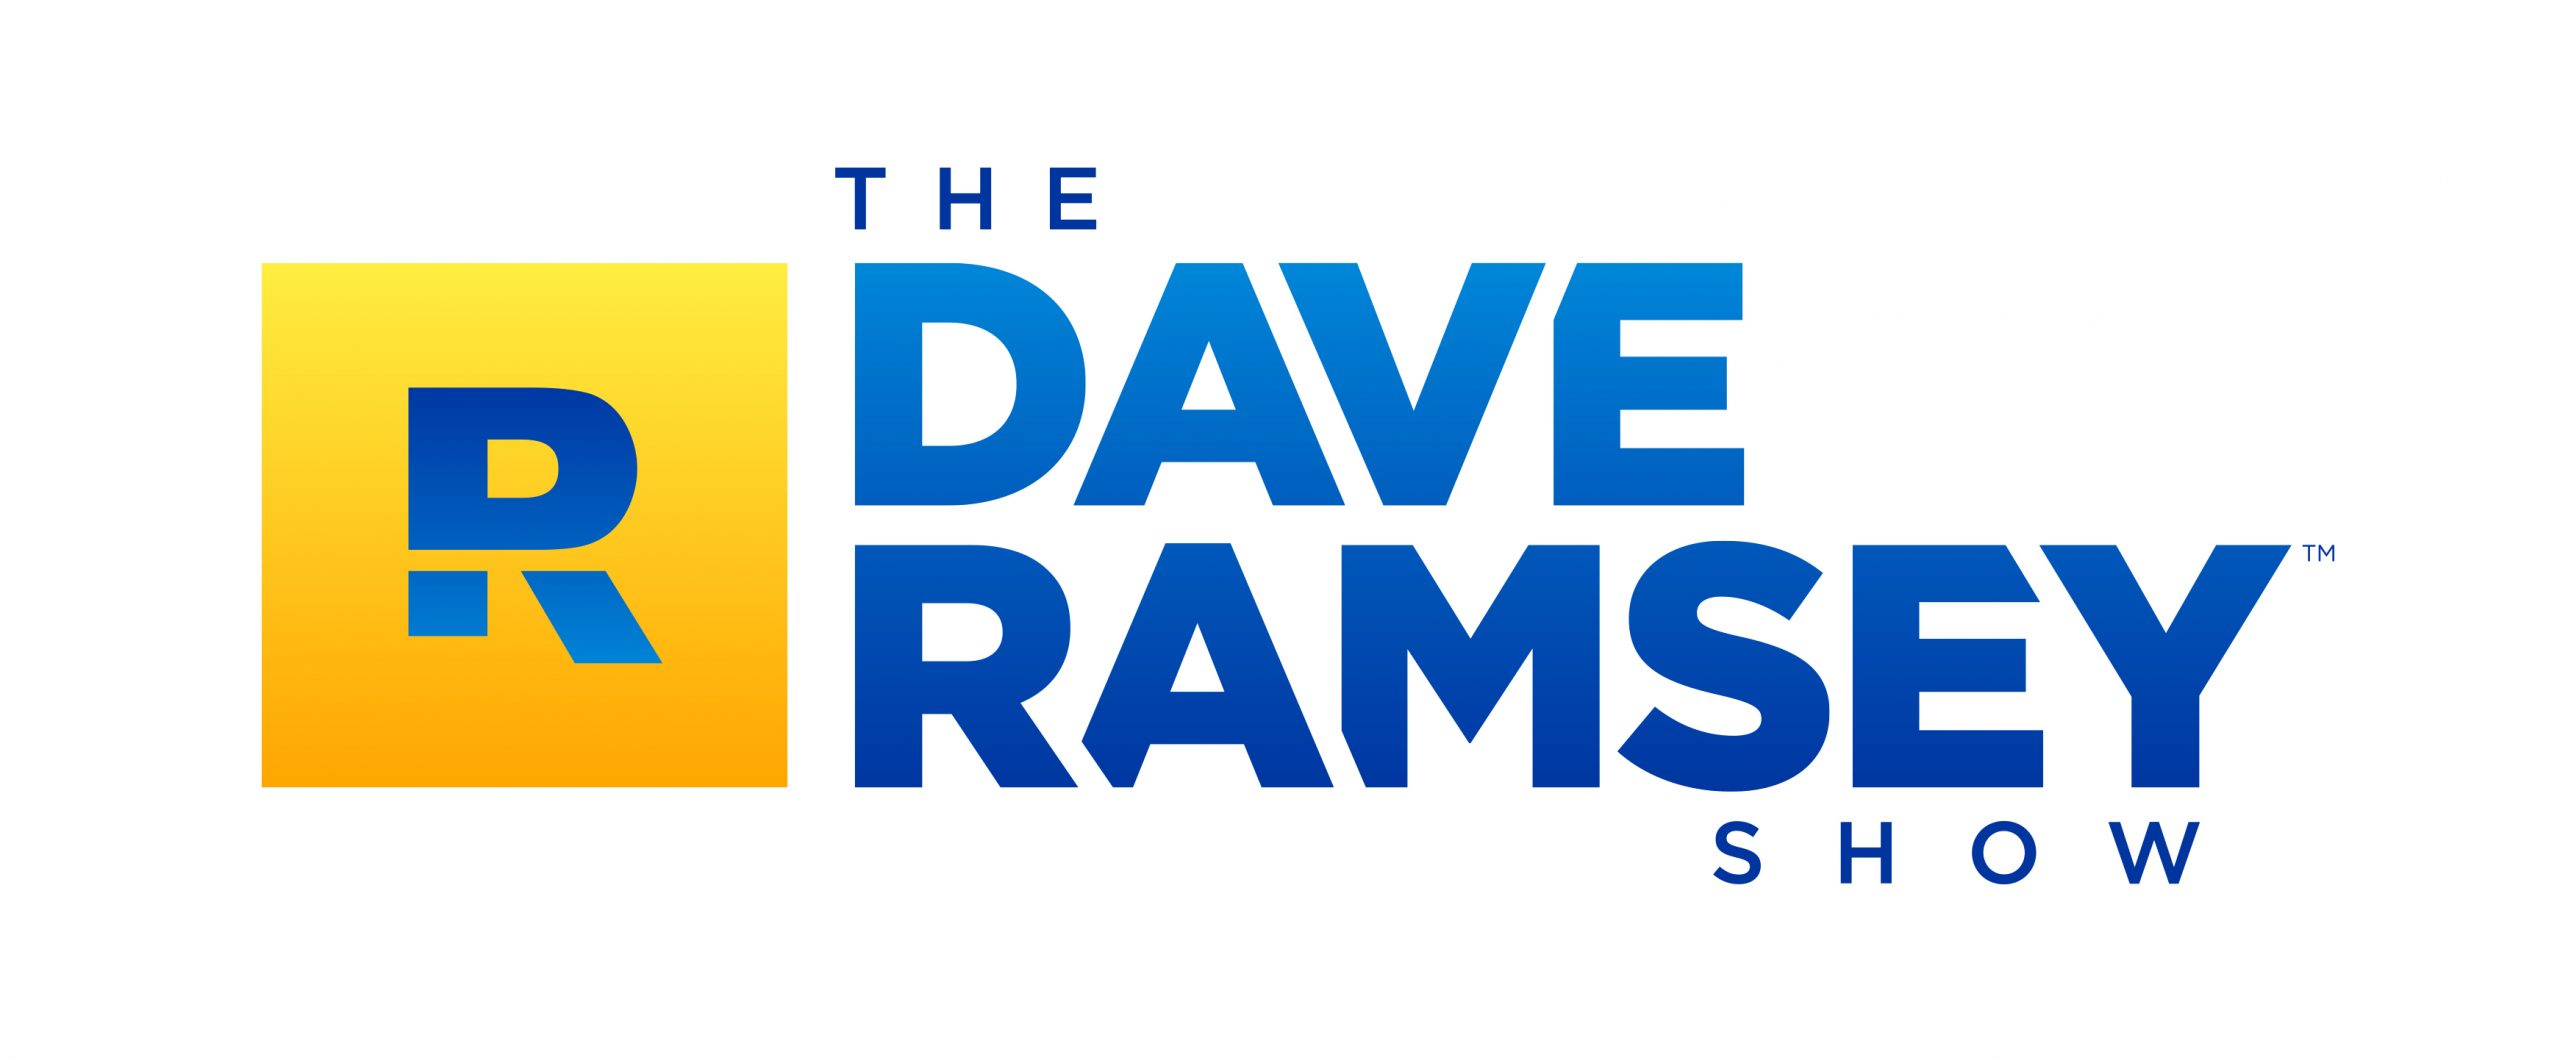 The-Dave-Ramsey-Show